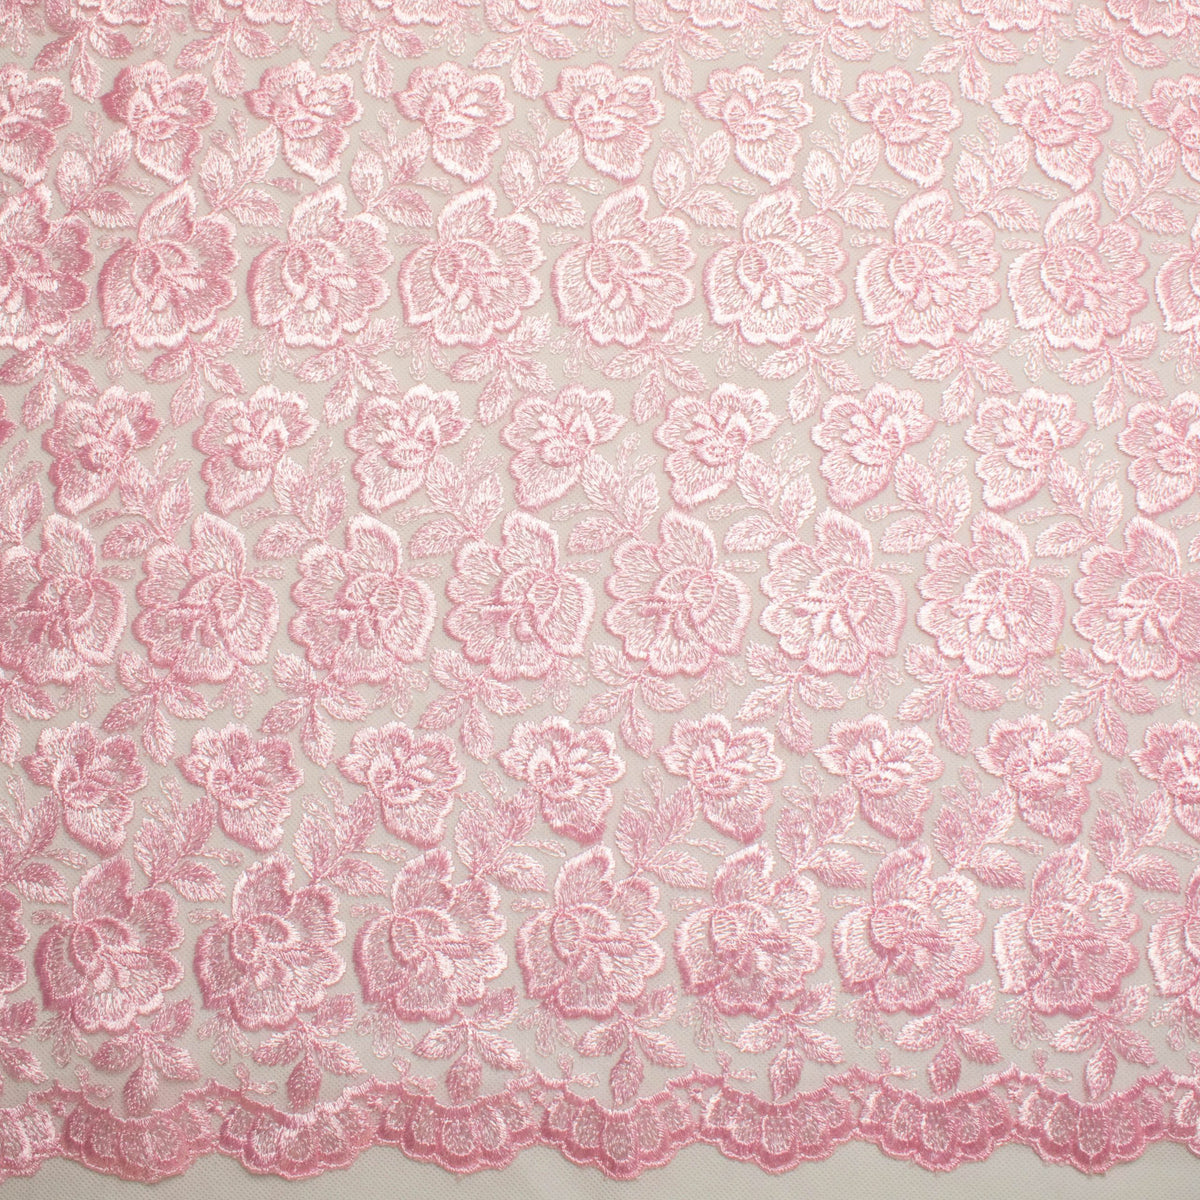 Baby Pink - All-Over Sequin Fabric - Thimbles Fabric Shop Online